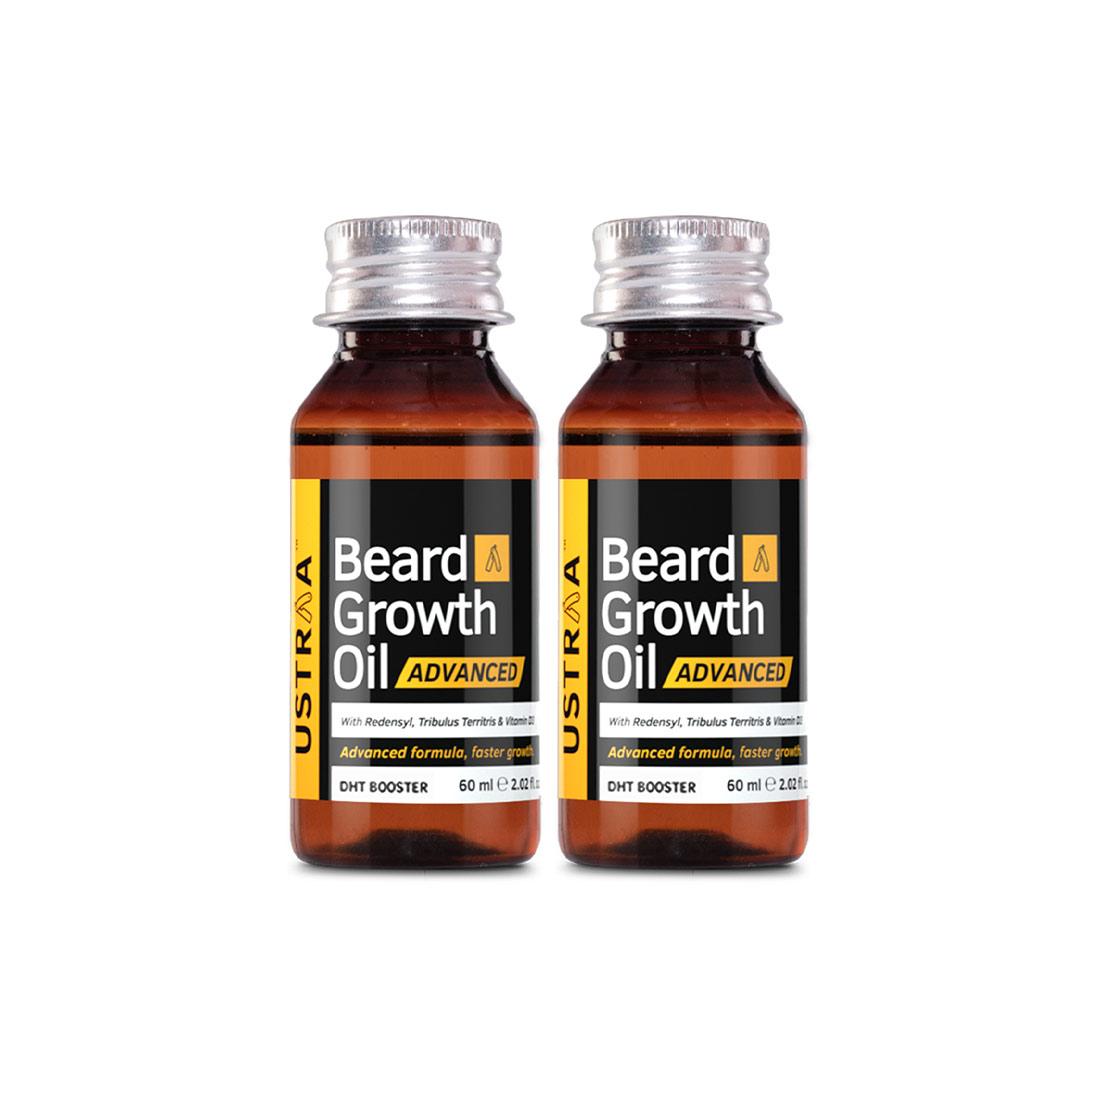 Ustraa Beard Growth Oil Advanced - With Redensyl and DHT Booster, 60ml